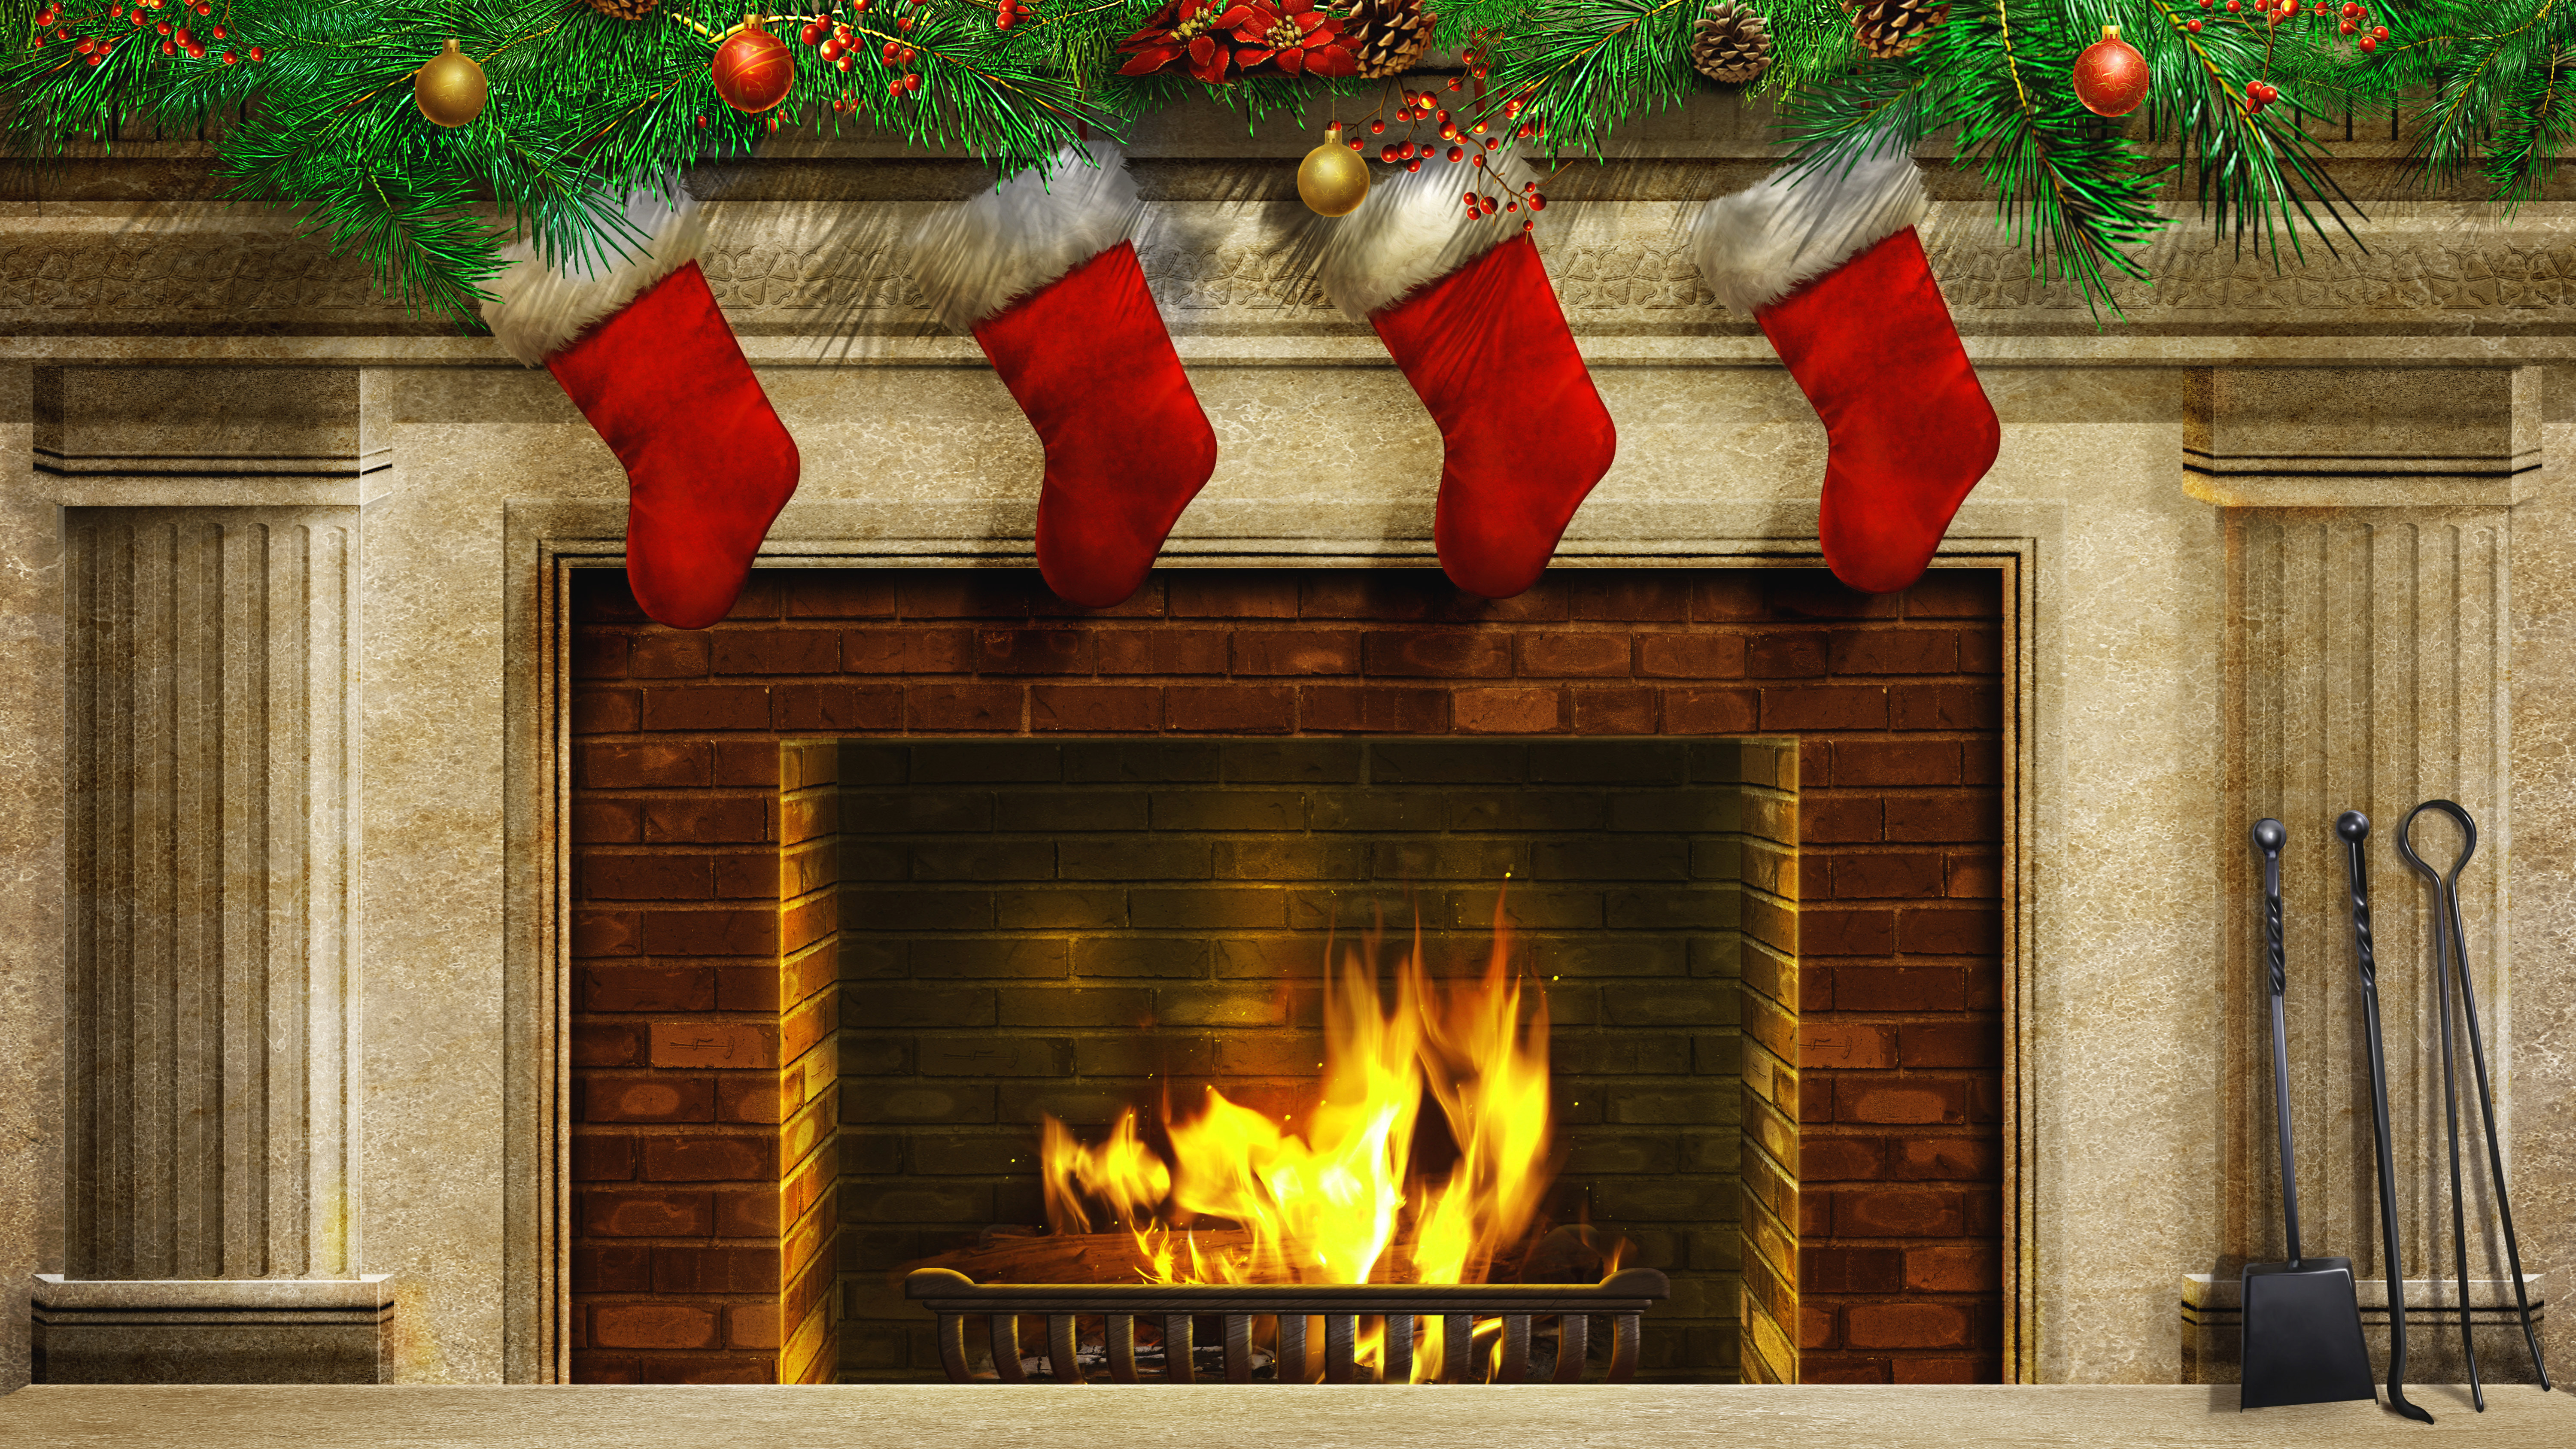 Christmas Fireplace and Christmas Stockings Background​-Quality Image and Transparent PNG Free Clipart